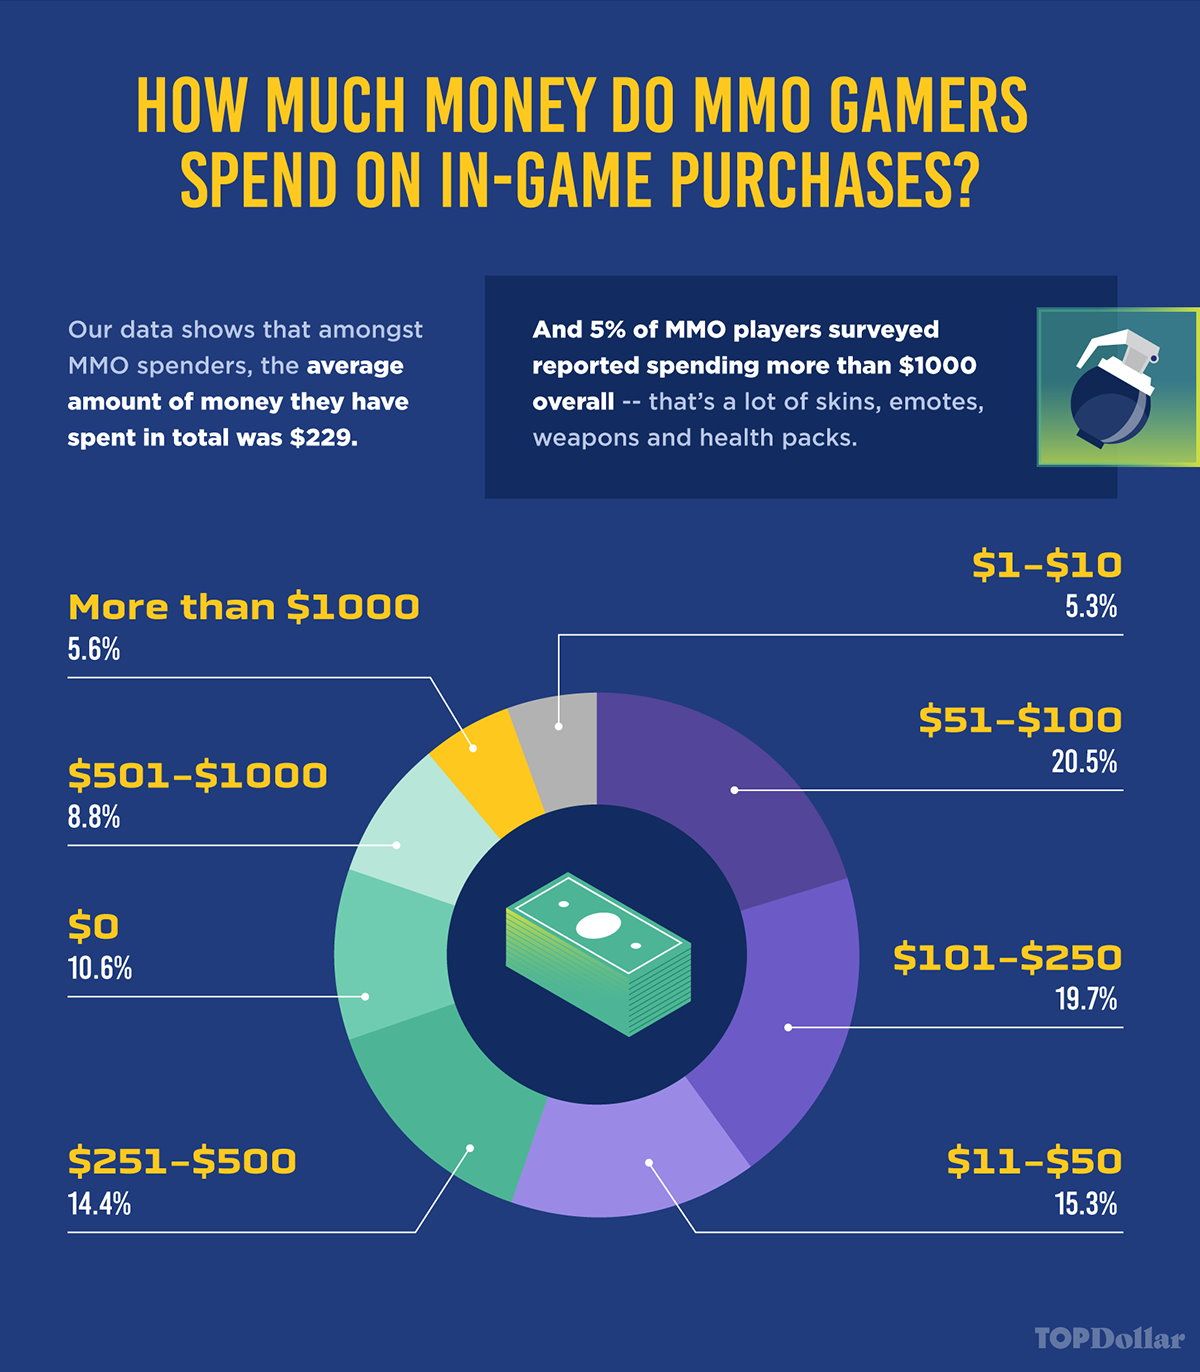 New Survey Reveals That Even If A Game Is Free-To-Play, Most Will Still Make In-Game Purchases